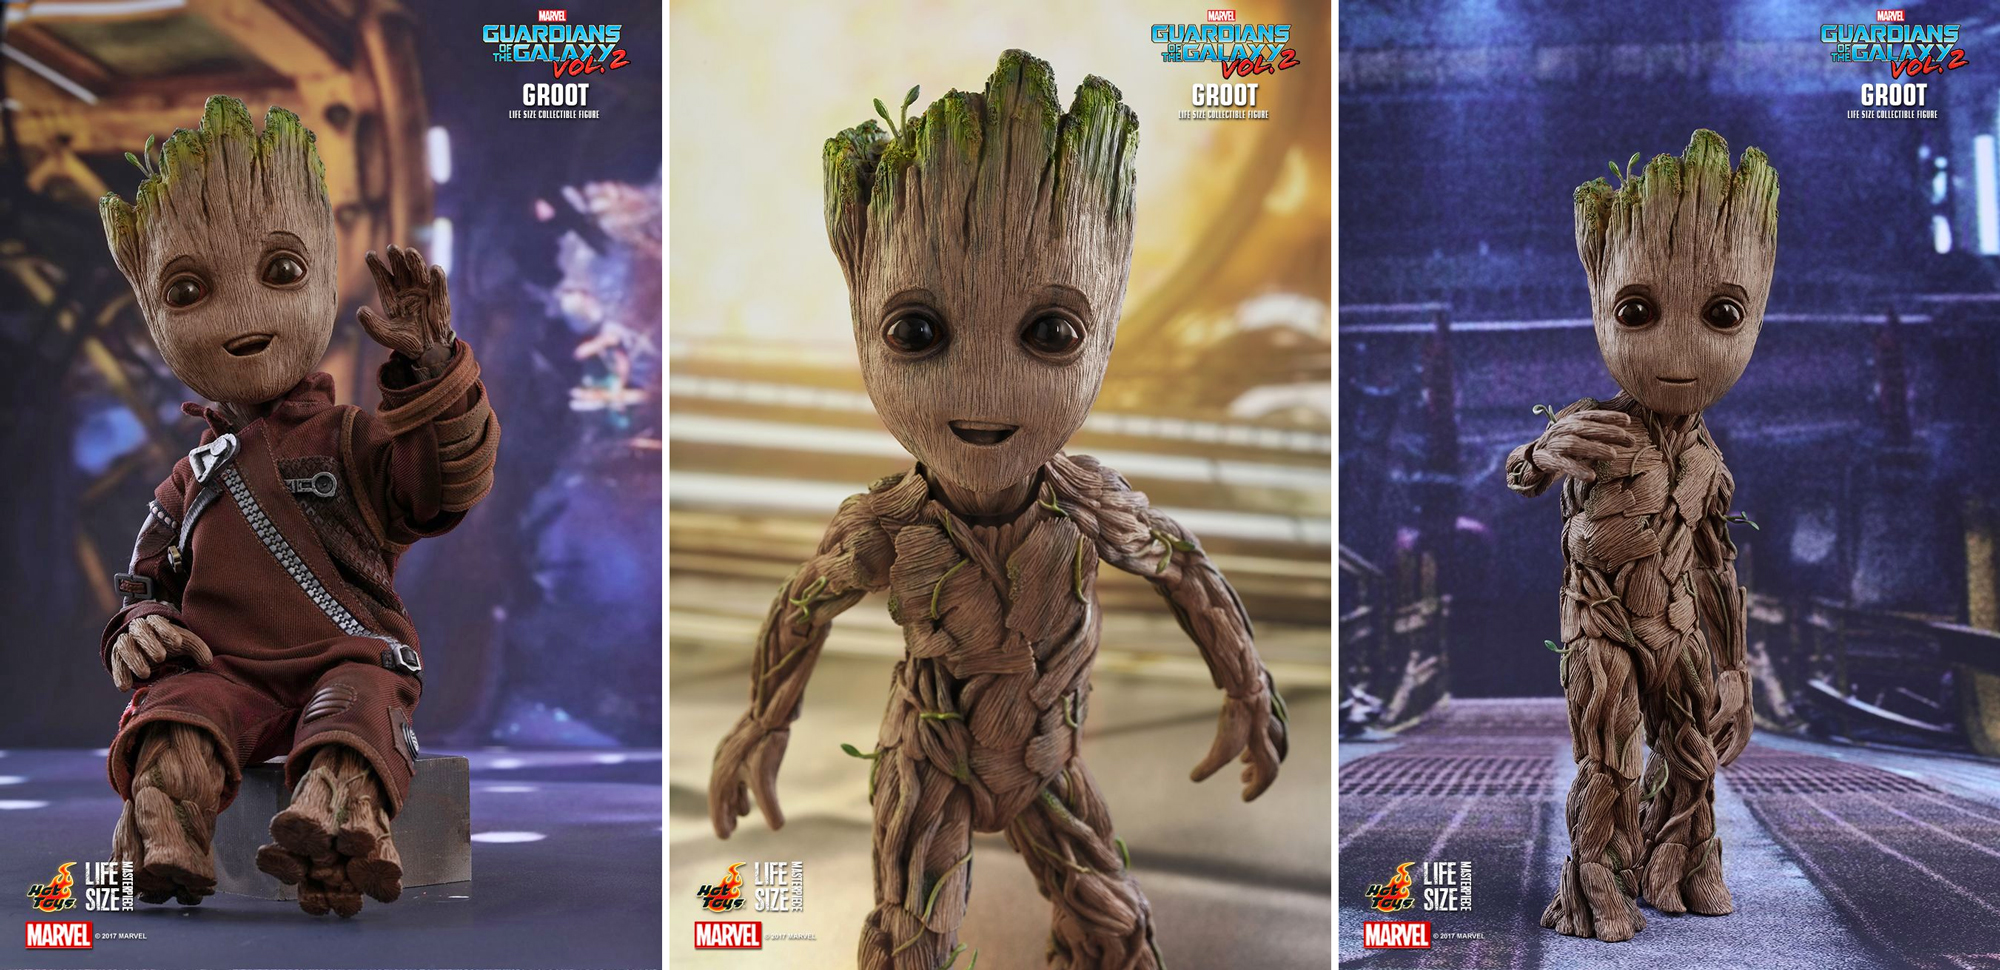 One Great Groot, And One Creepy One, In The Best Toys We’ve Seen This Week